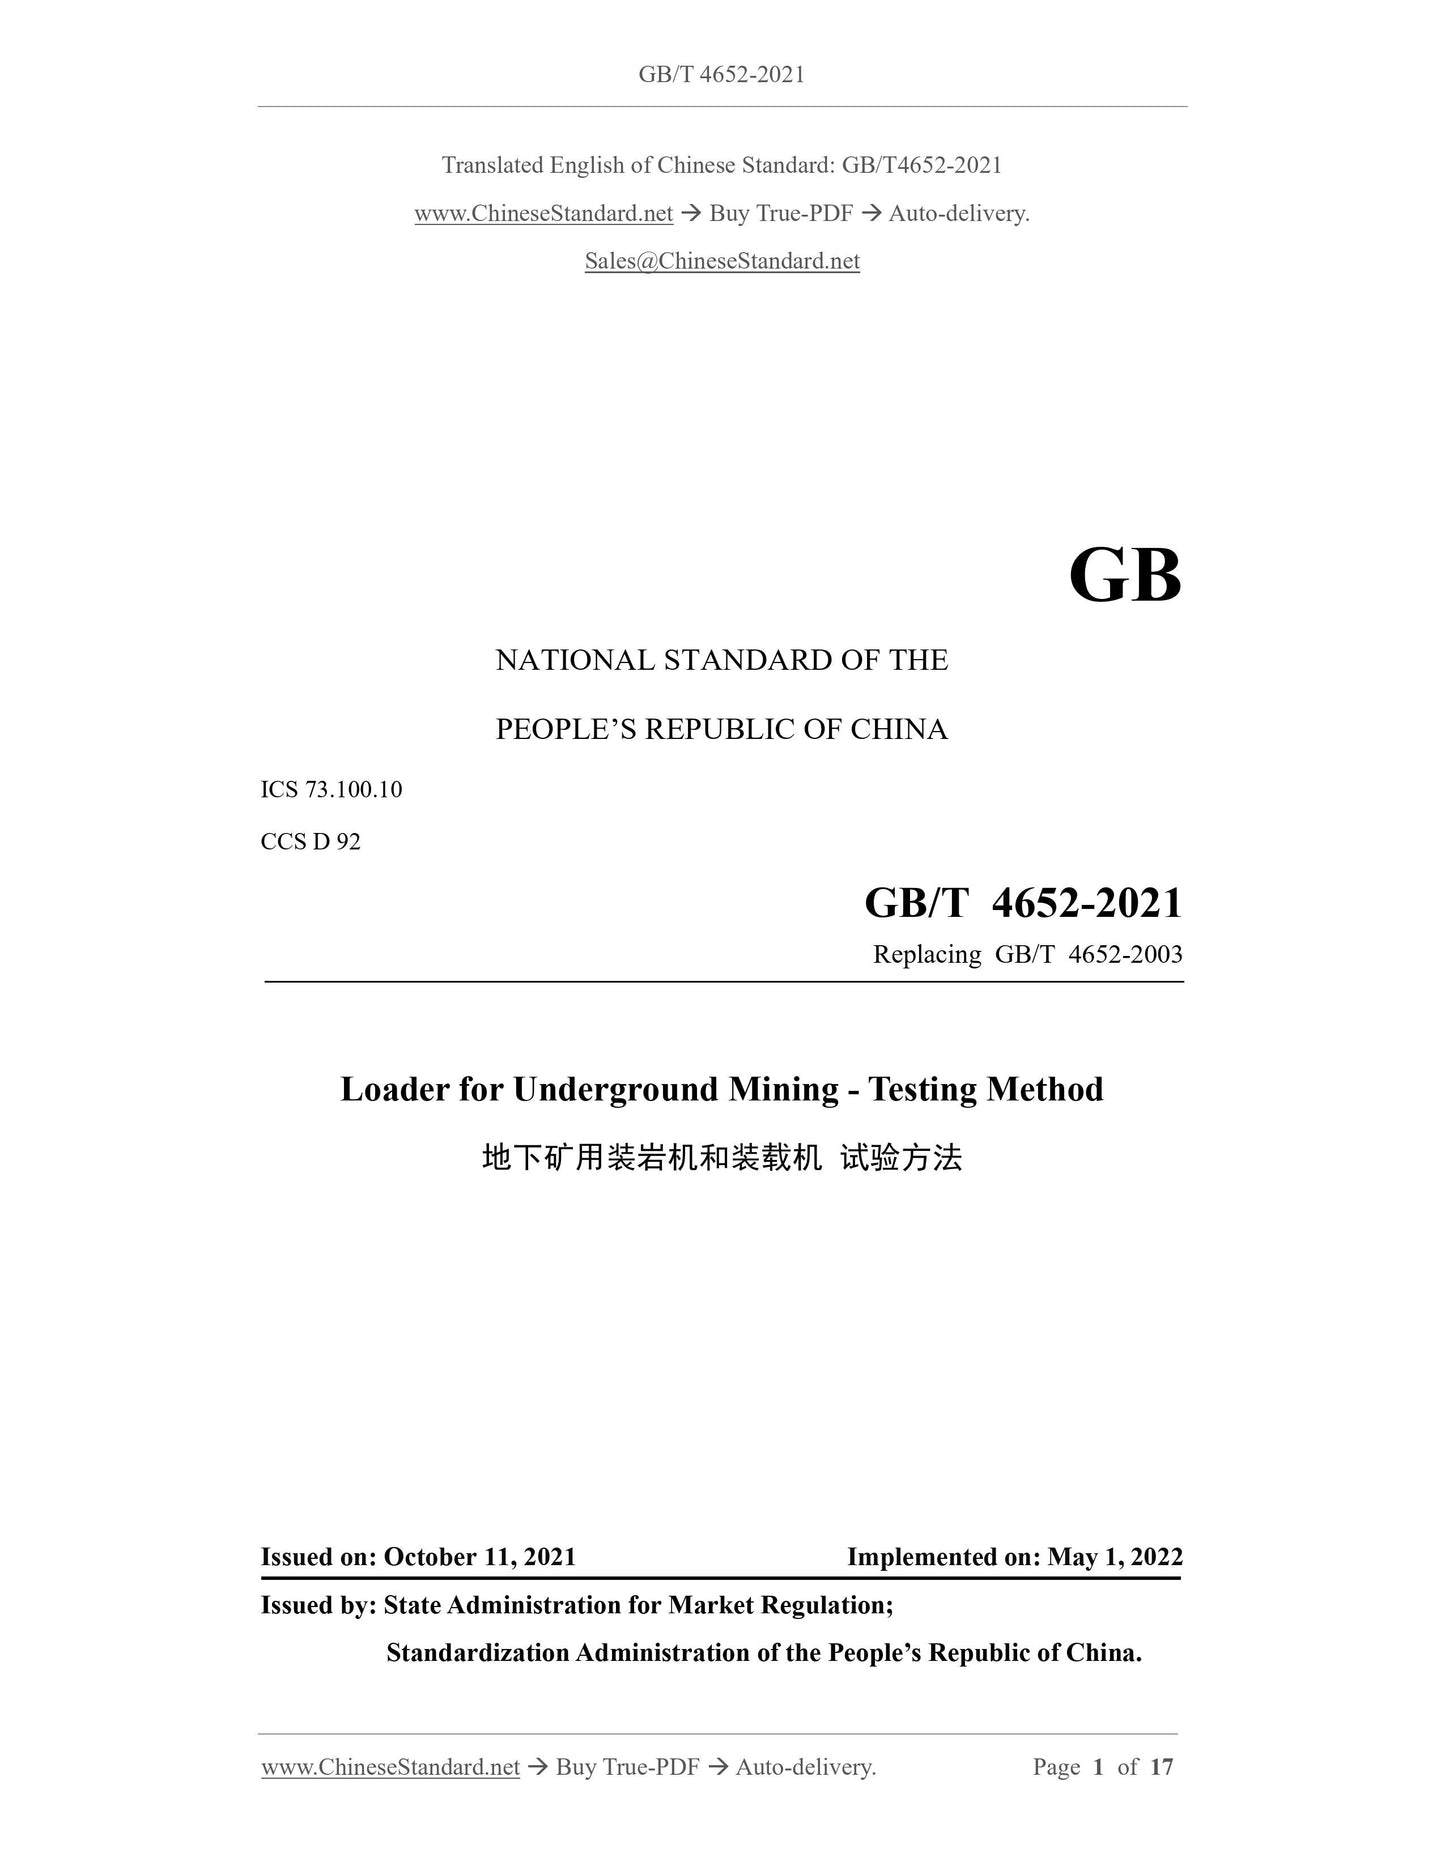 GB/T 4652-2021 Page 1